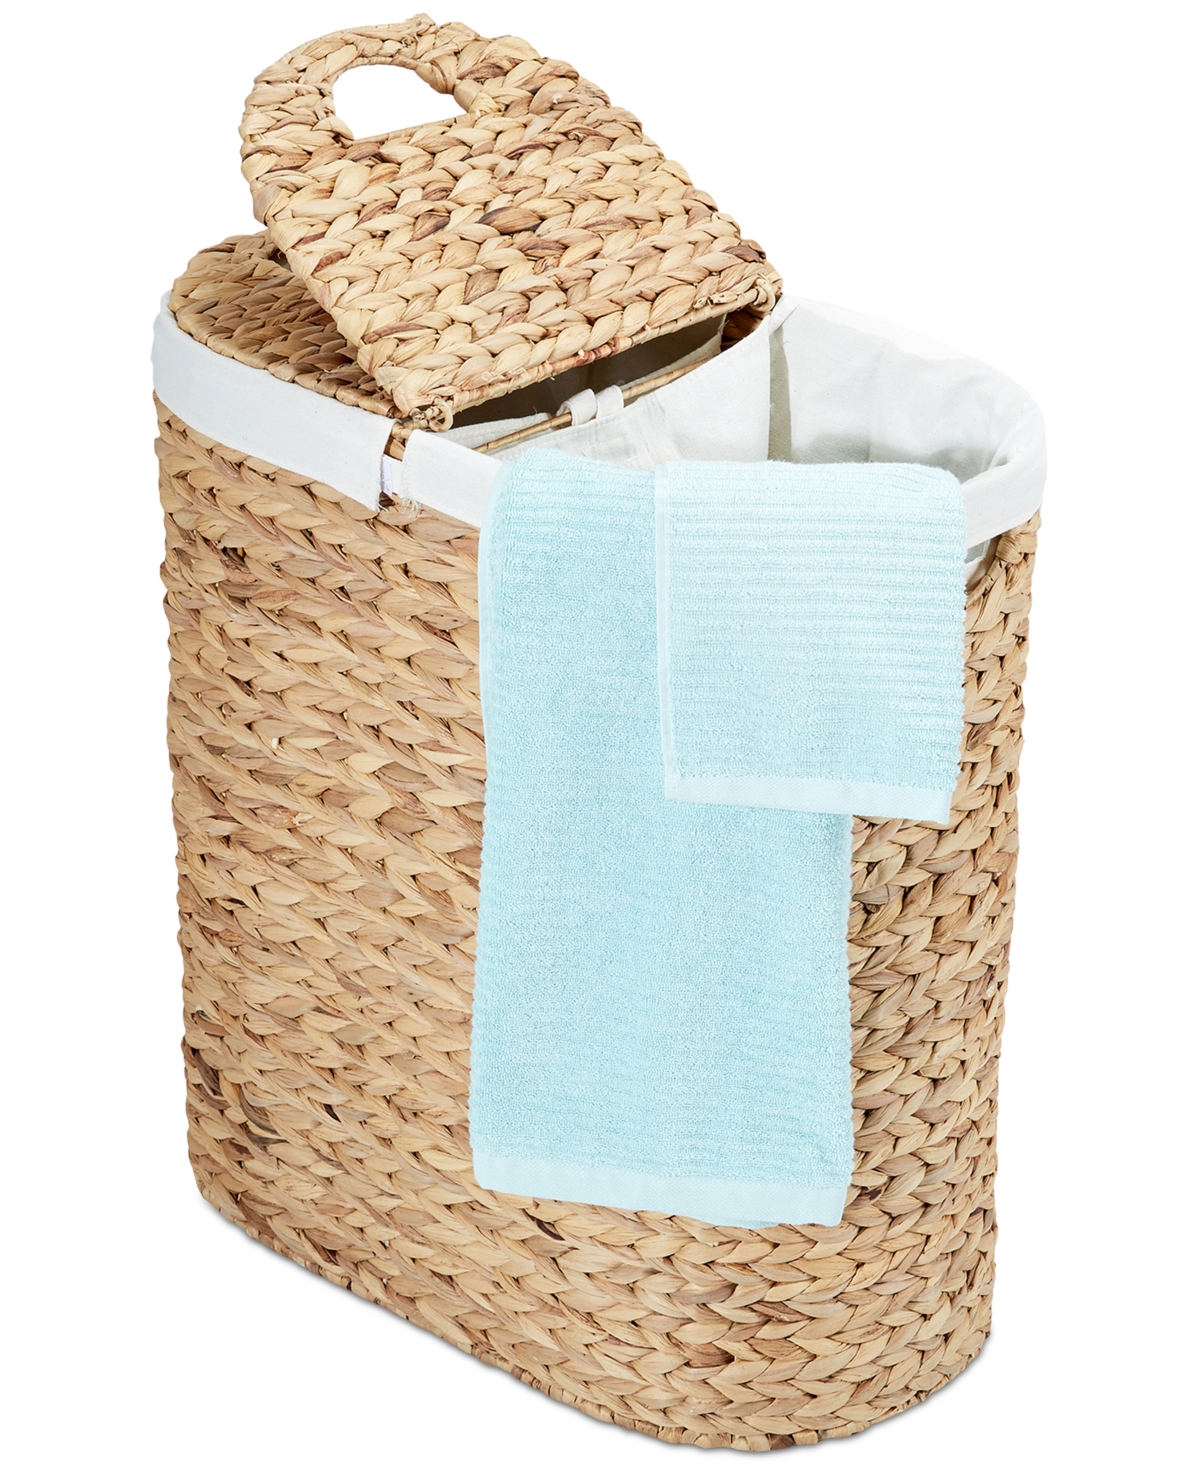 Hand-Woven Natural Wicker Lidded Double Laundry Hamper - Natural Wicker